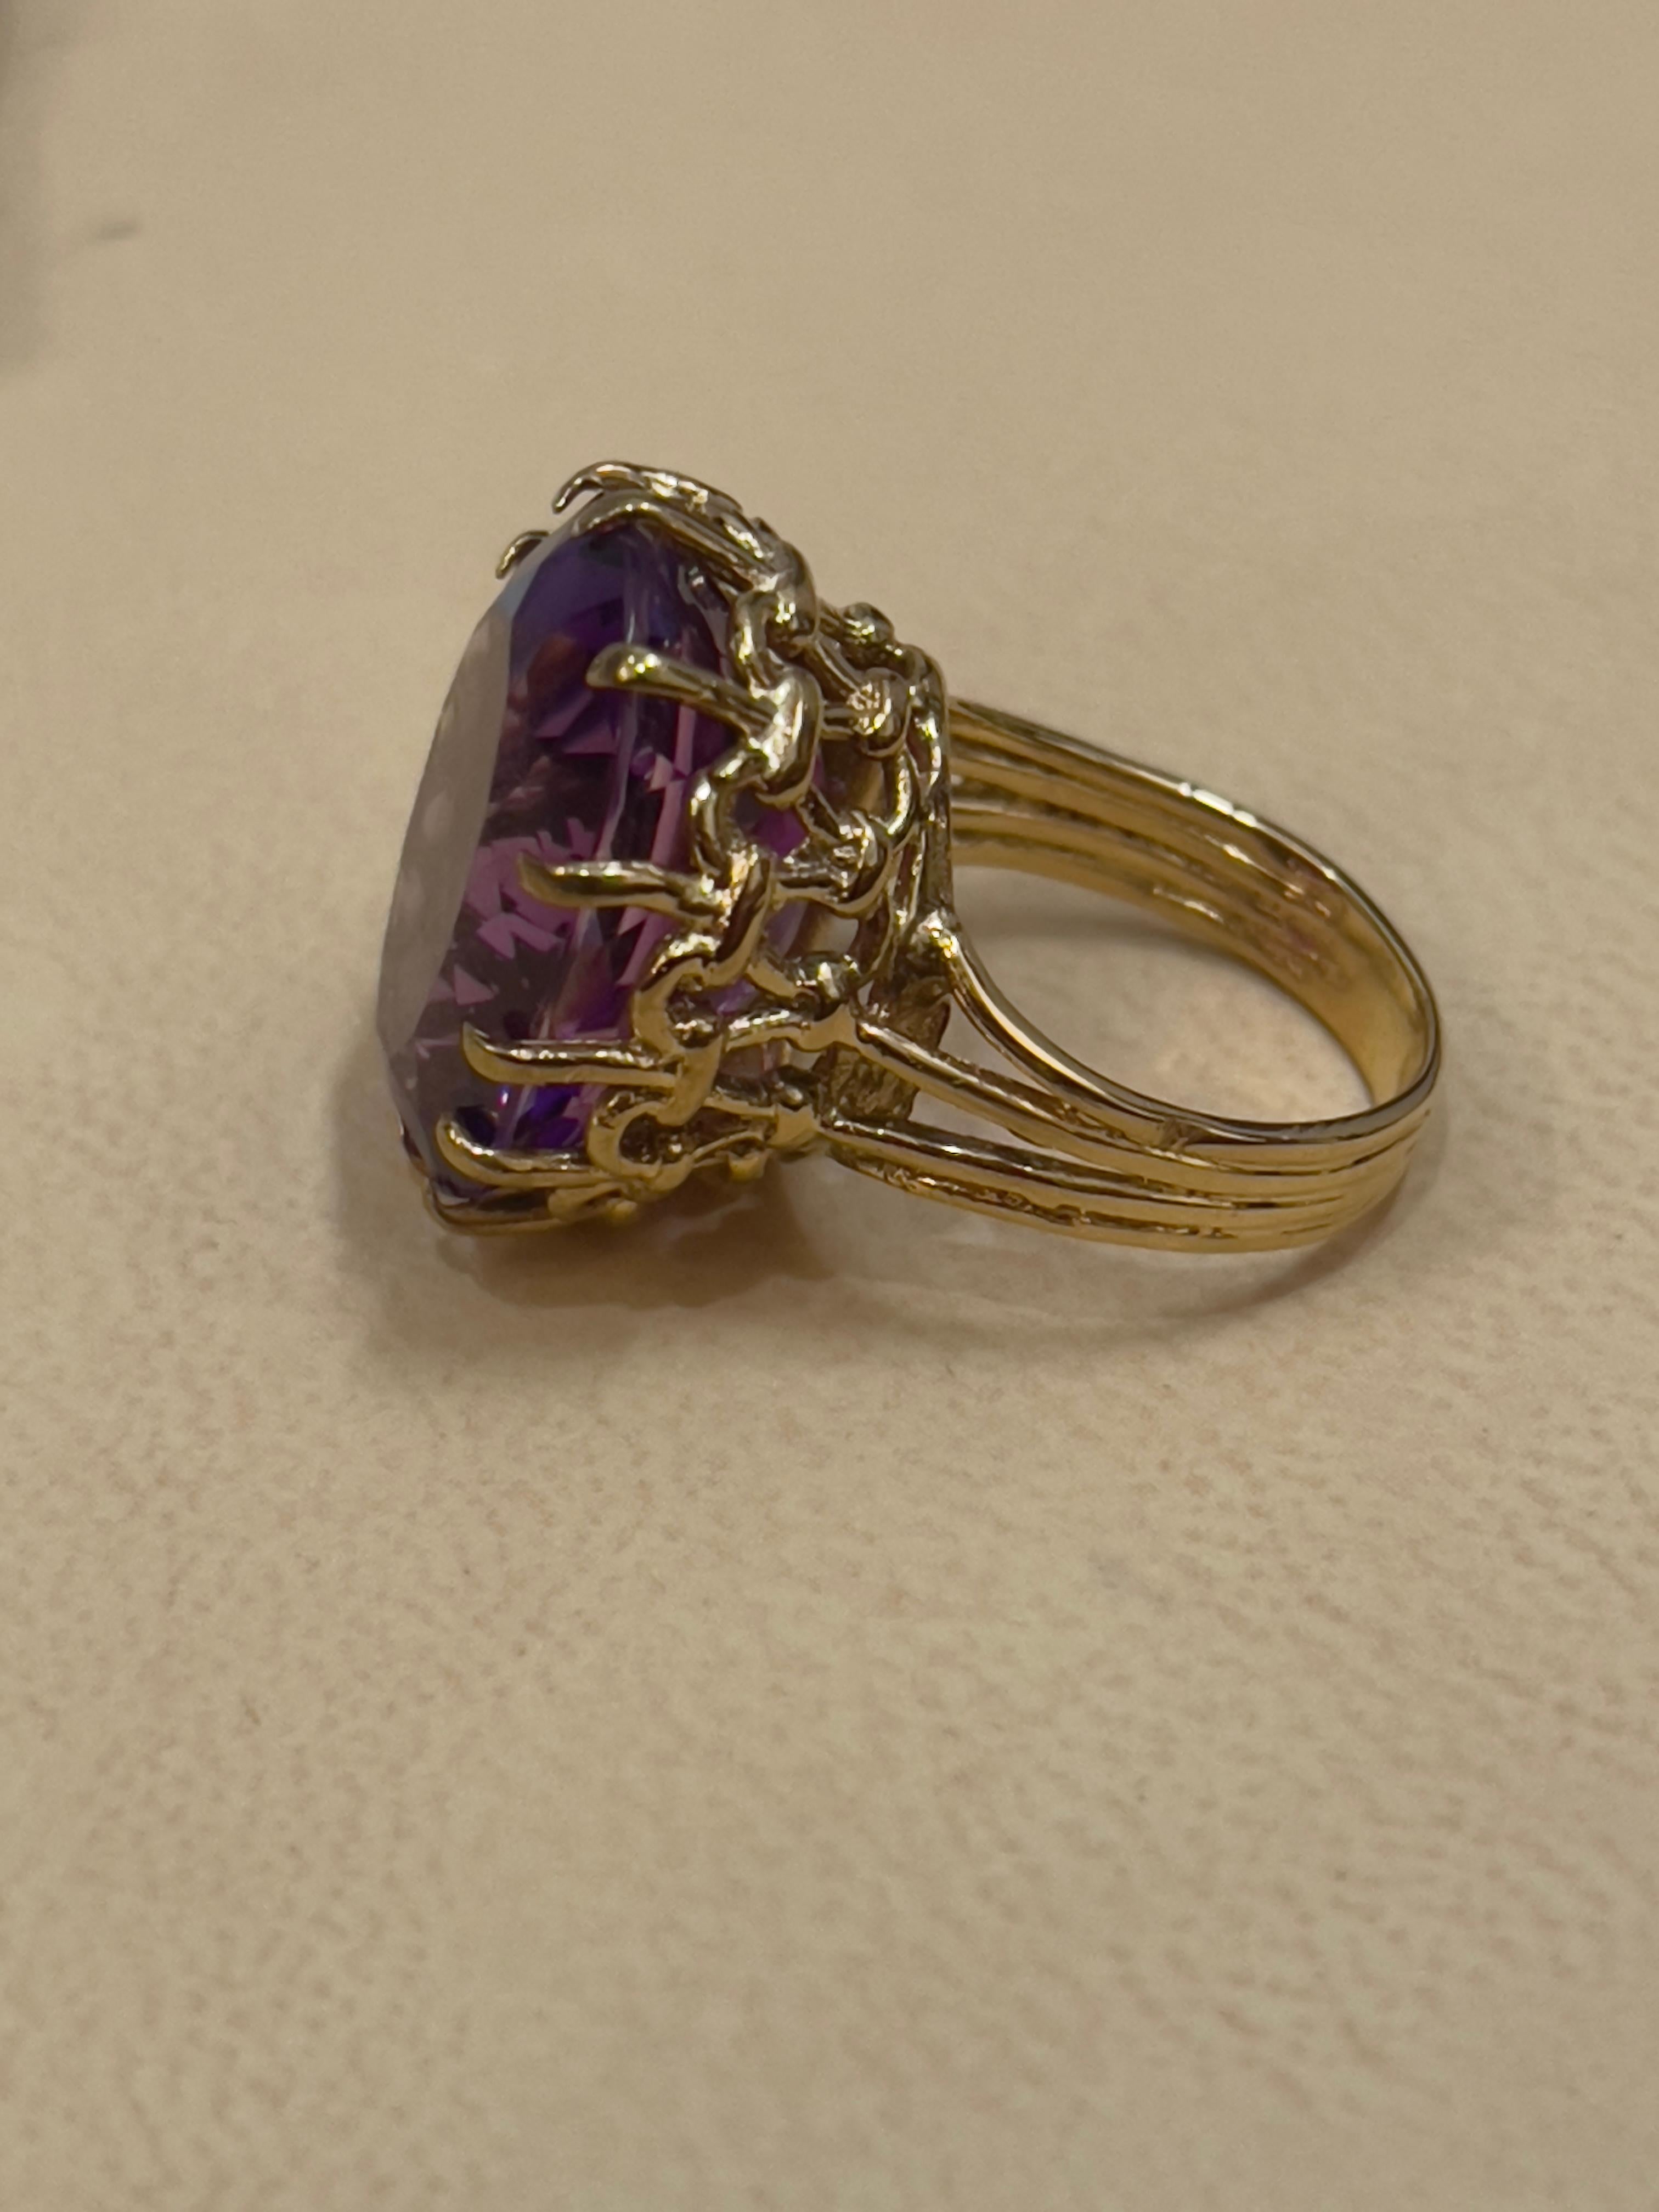 15 Carat Amethyst Cocktail Ring in 14 Karat Yellow Gold In Excellent Condition For Sale In New York, NY